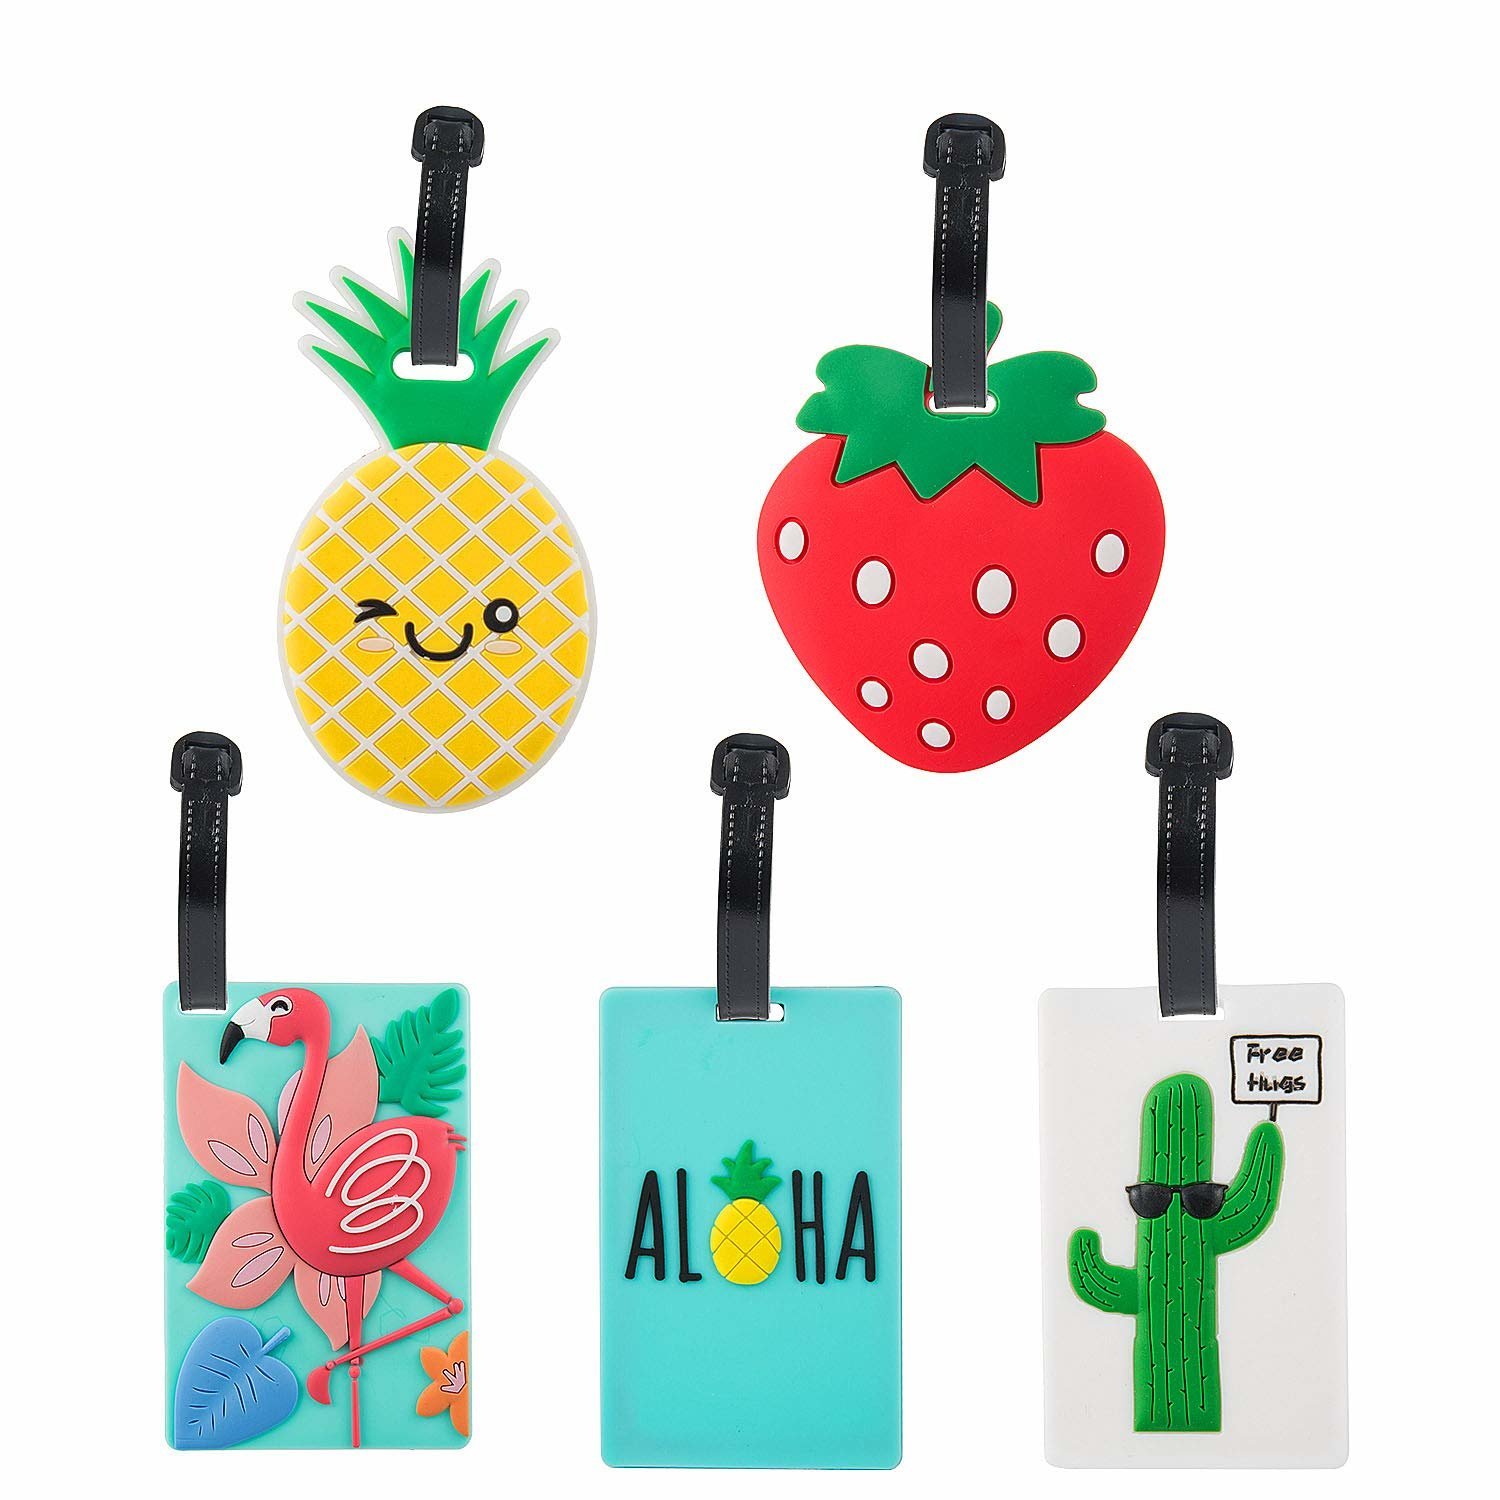 Suitcase ID Label with Privacy Cover Gifts for Travelers 2 Pcs XKAWPC Funny Pizza and Pineapple Leather Luggage Tag Cool Travel Tag 